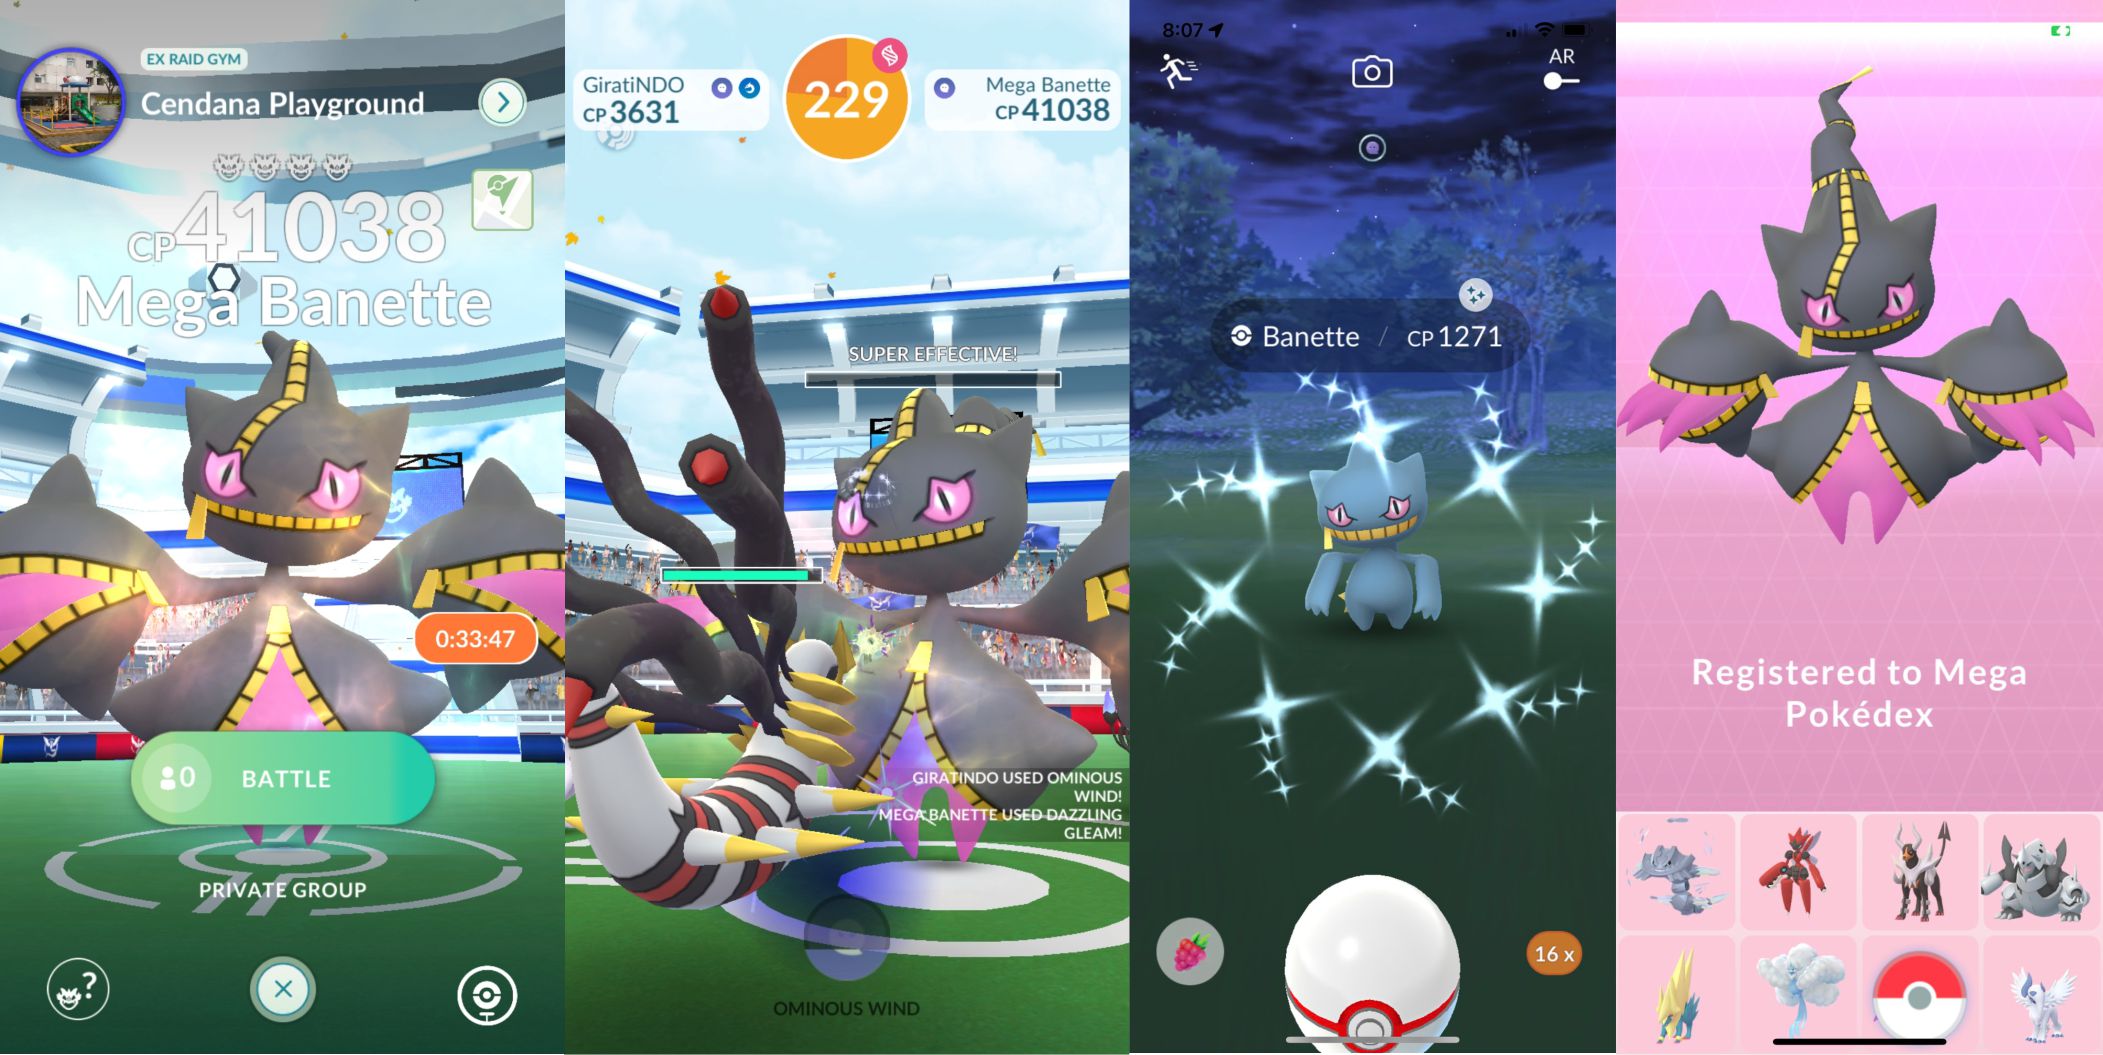 OCTOBER! THE WAIT IS OVER - SHINY GIRATINA ORIGIN & GREAT EVENTS